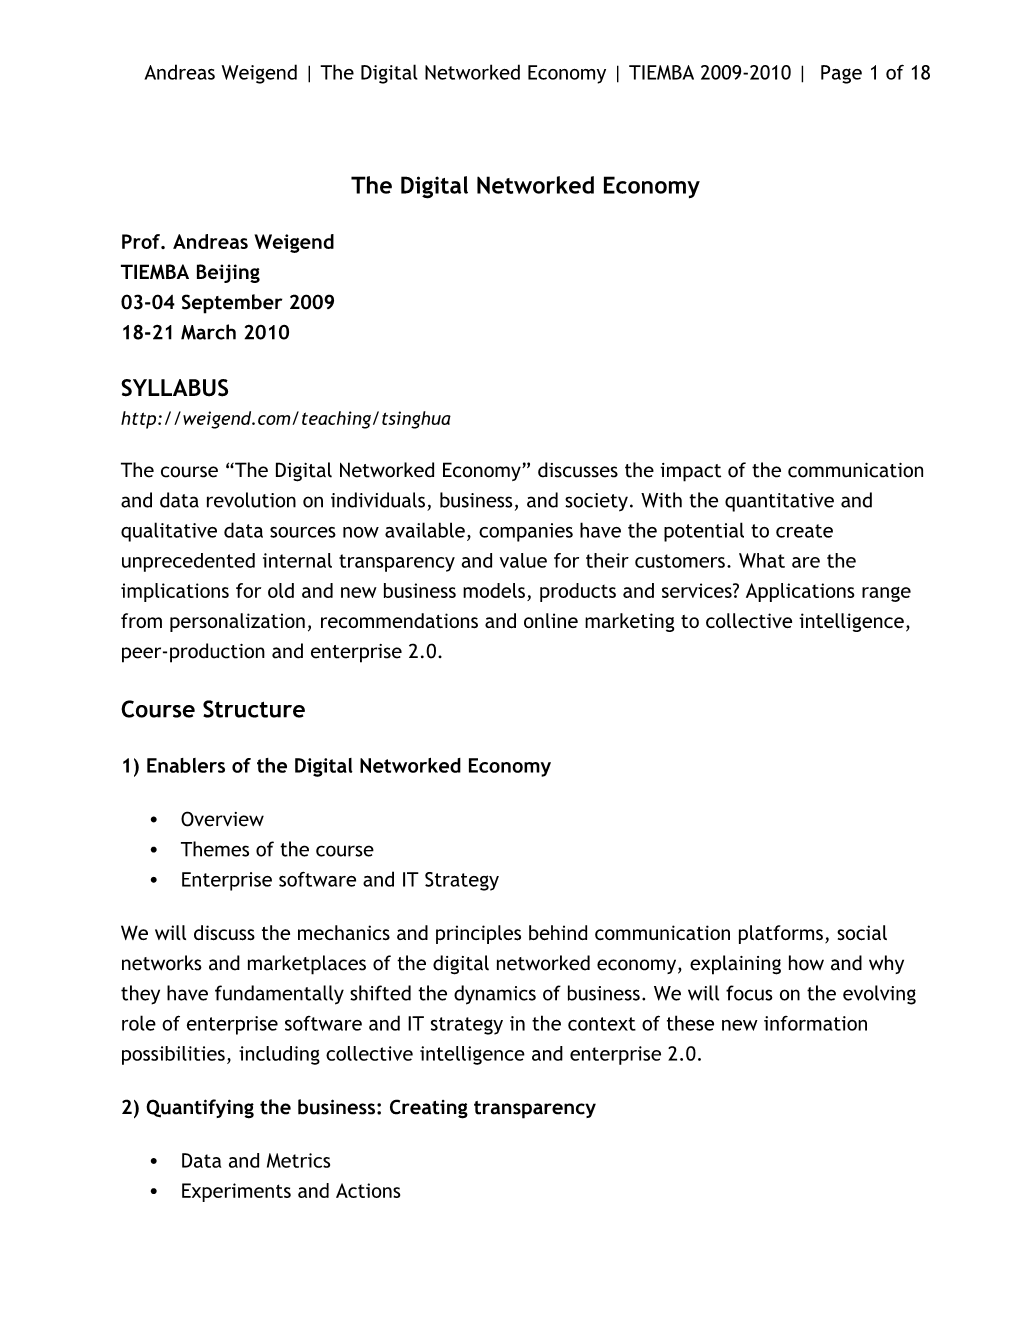 Andreas Weigend the Digital Networked Economy TIEMBA 2009-2010 Page 18 of 18